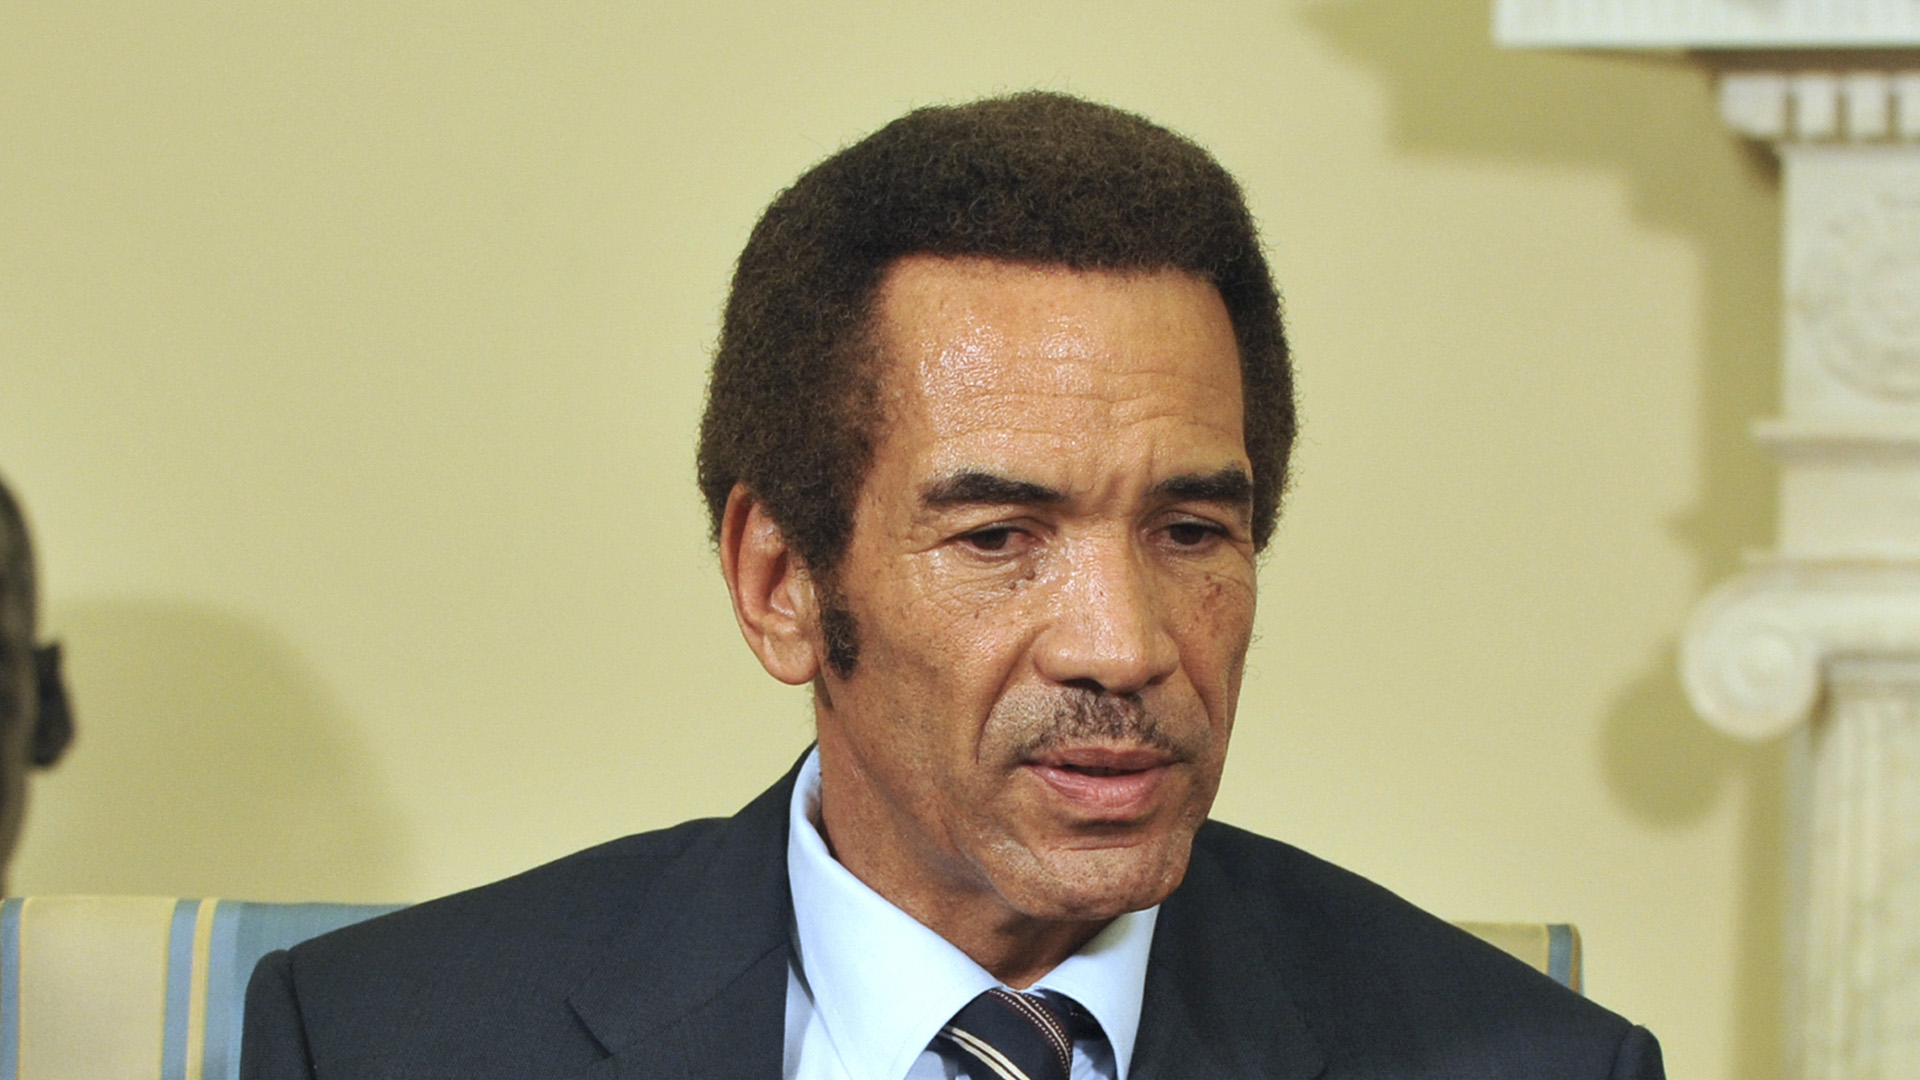 Botswana former President Khama to face trial for 13 criminal charges